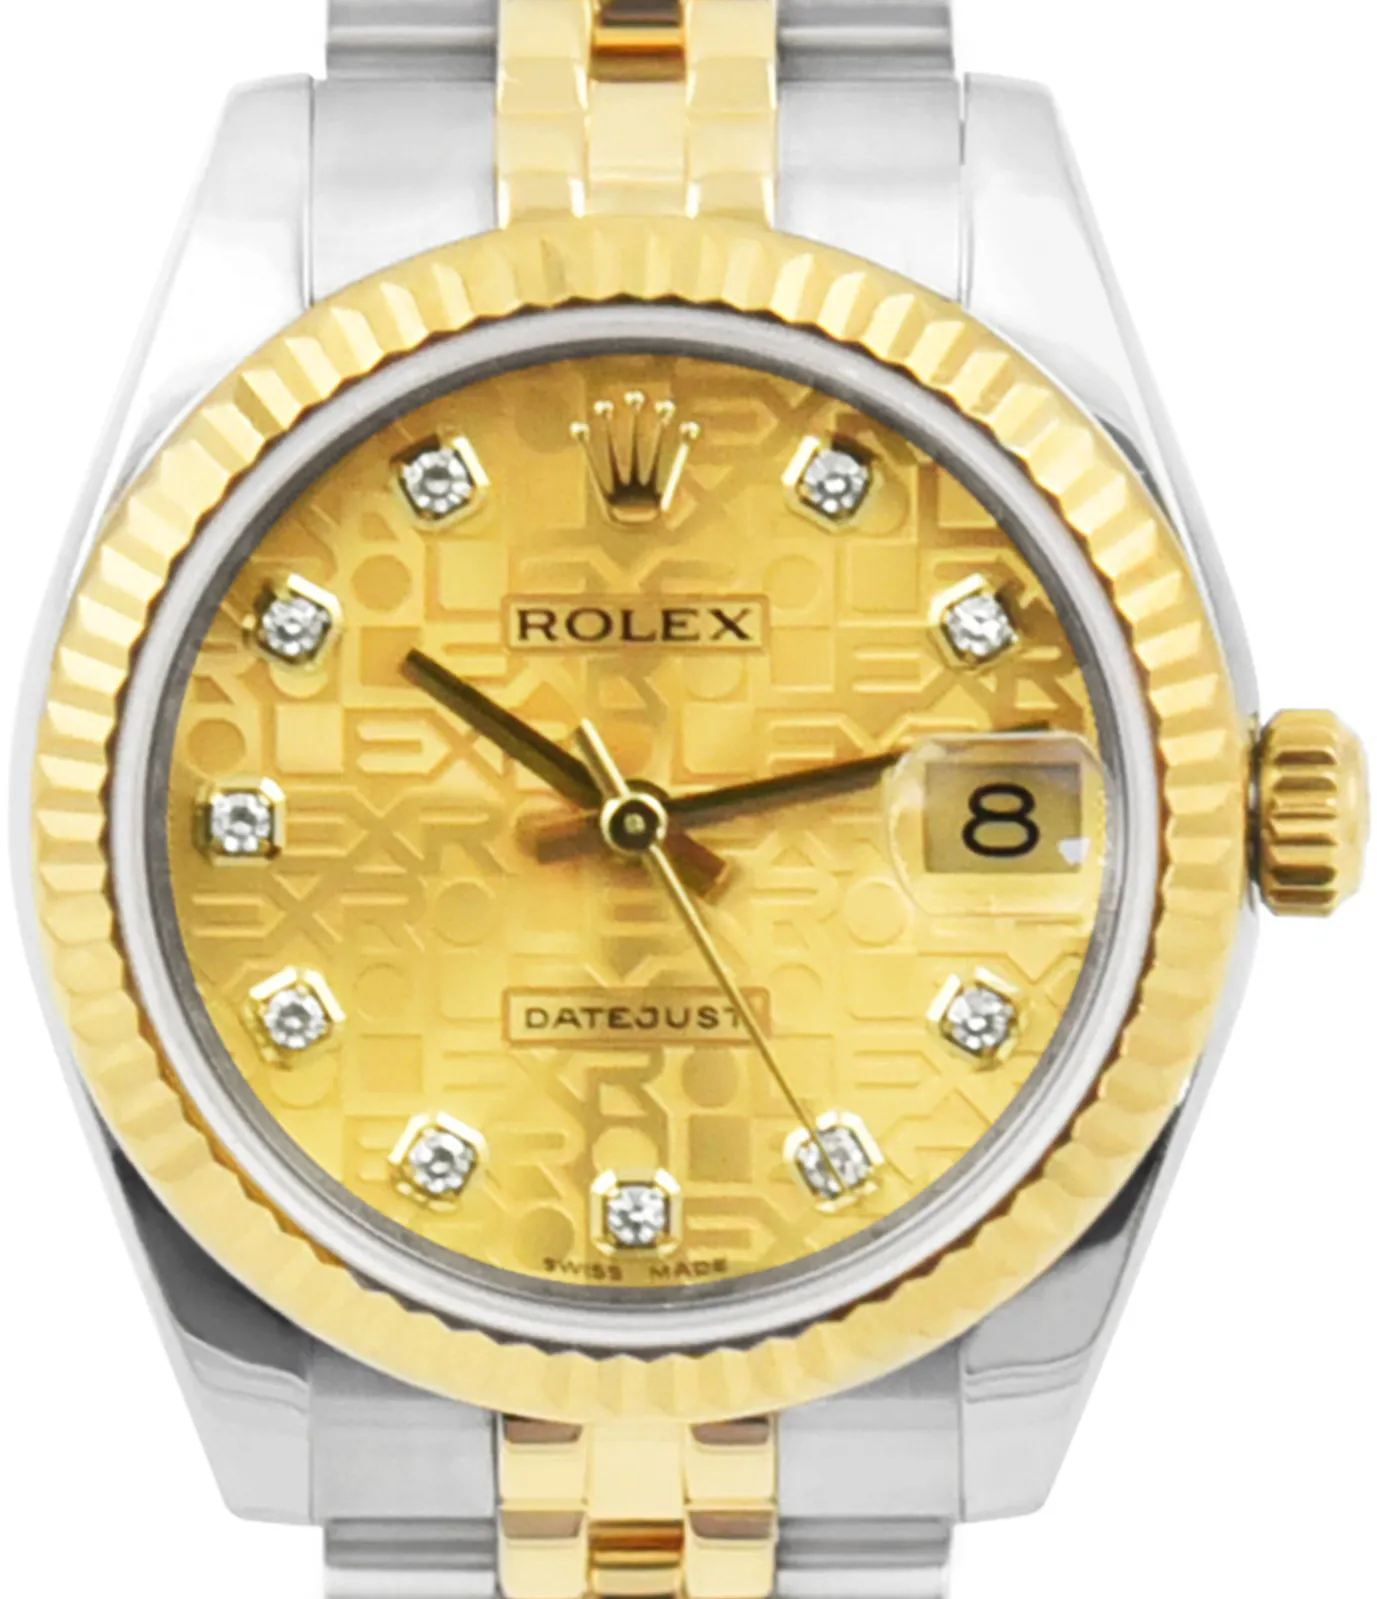 Rolex Datejust 178273 31mm Yellow gold and stainless steel •